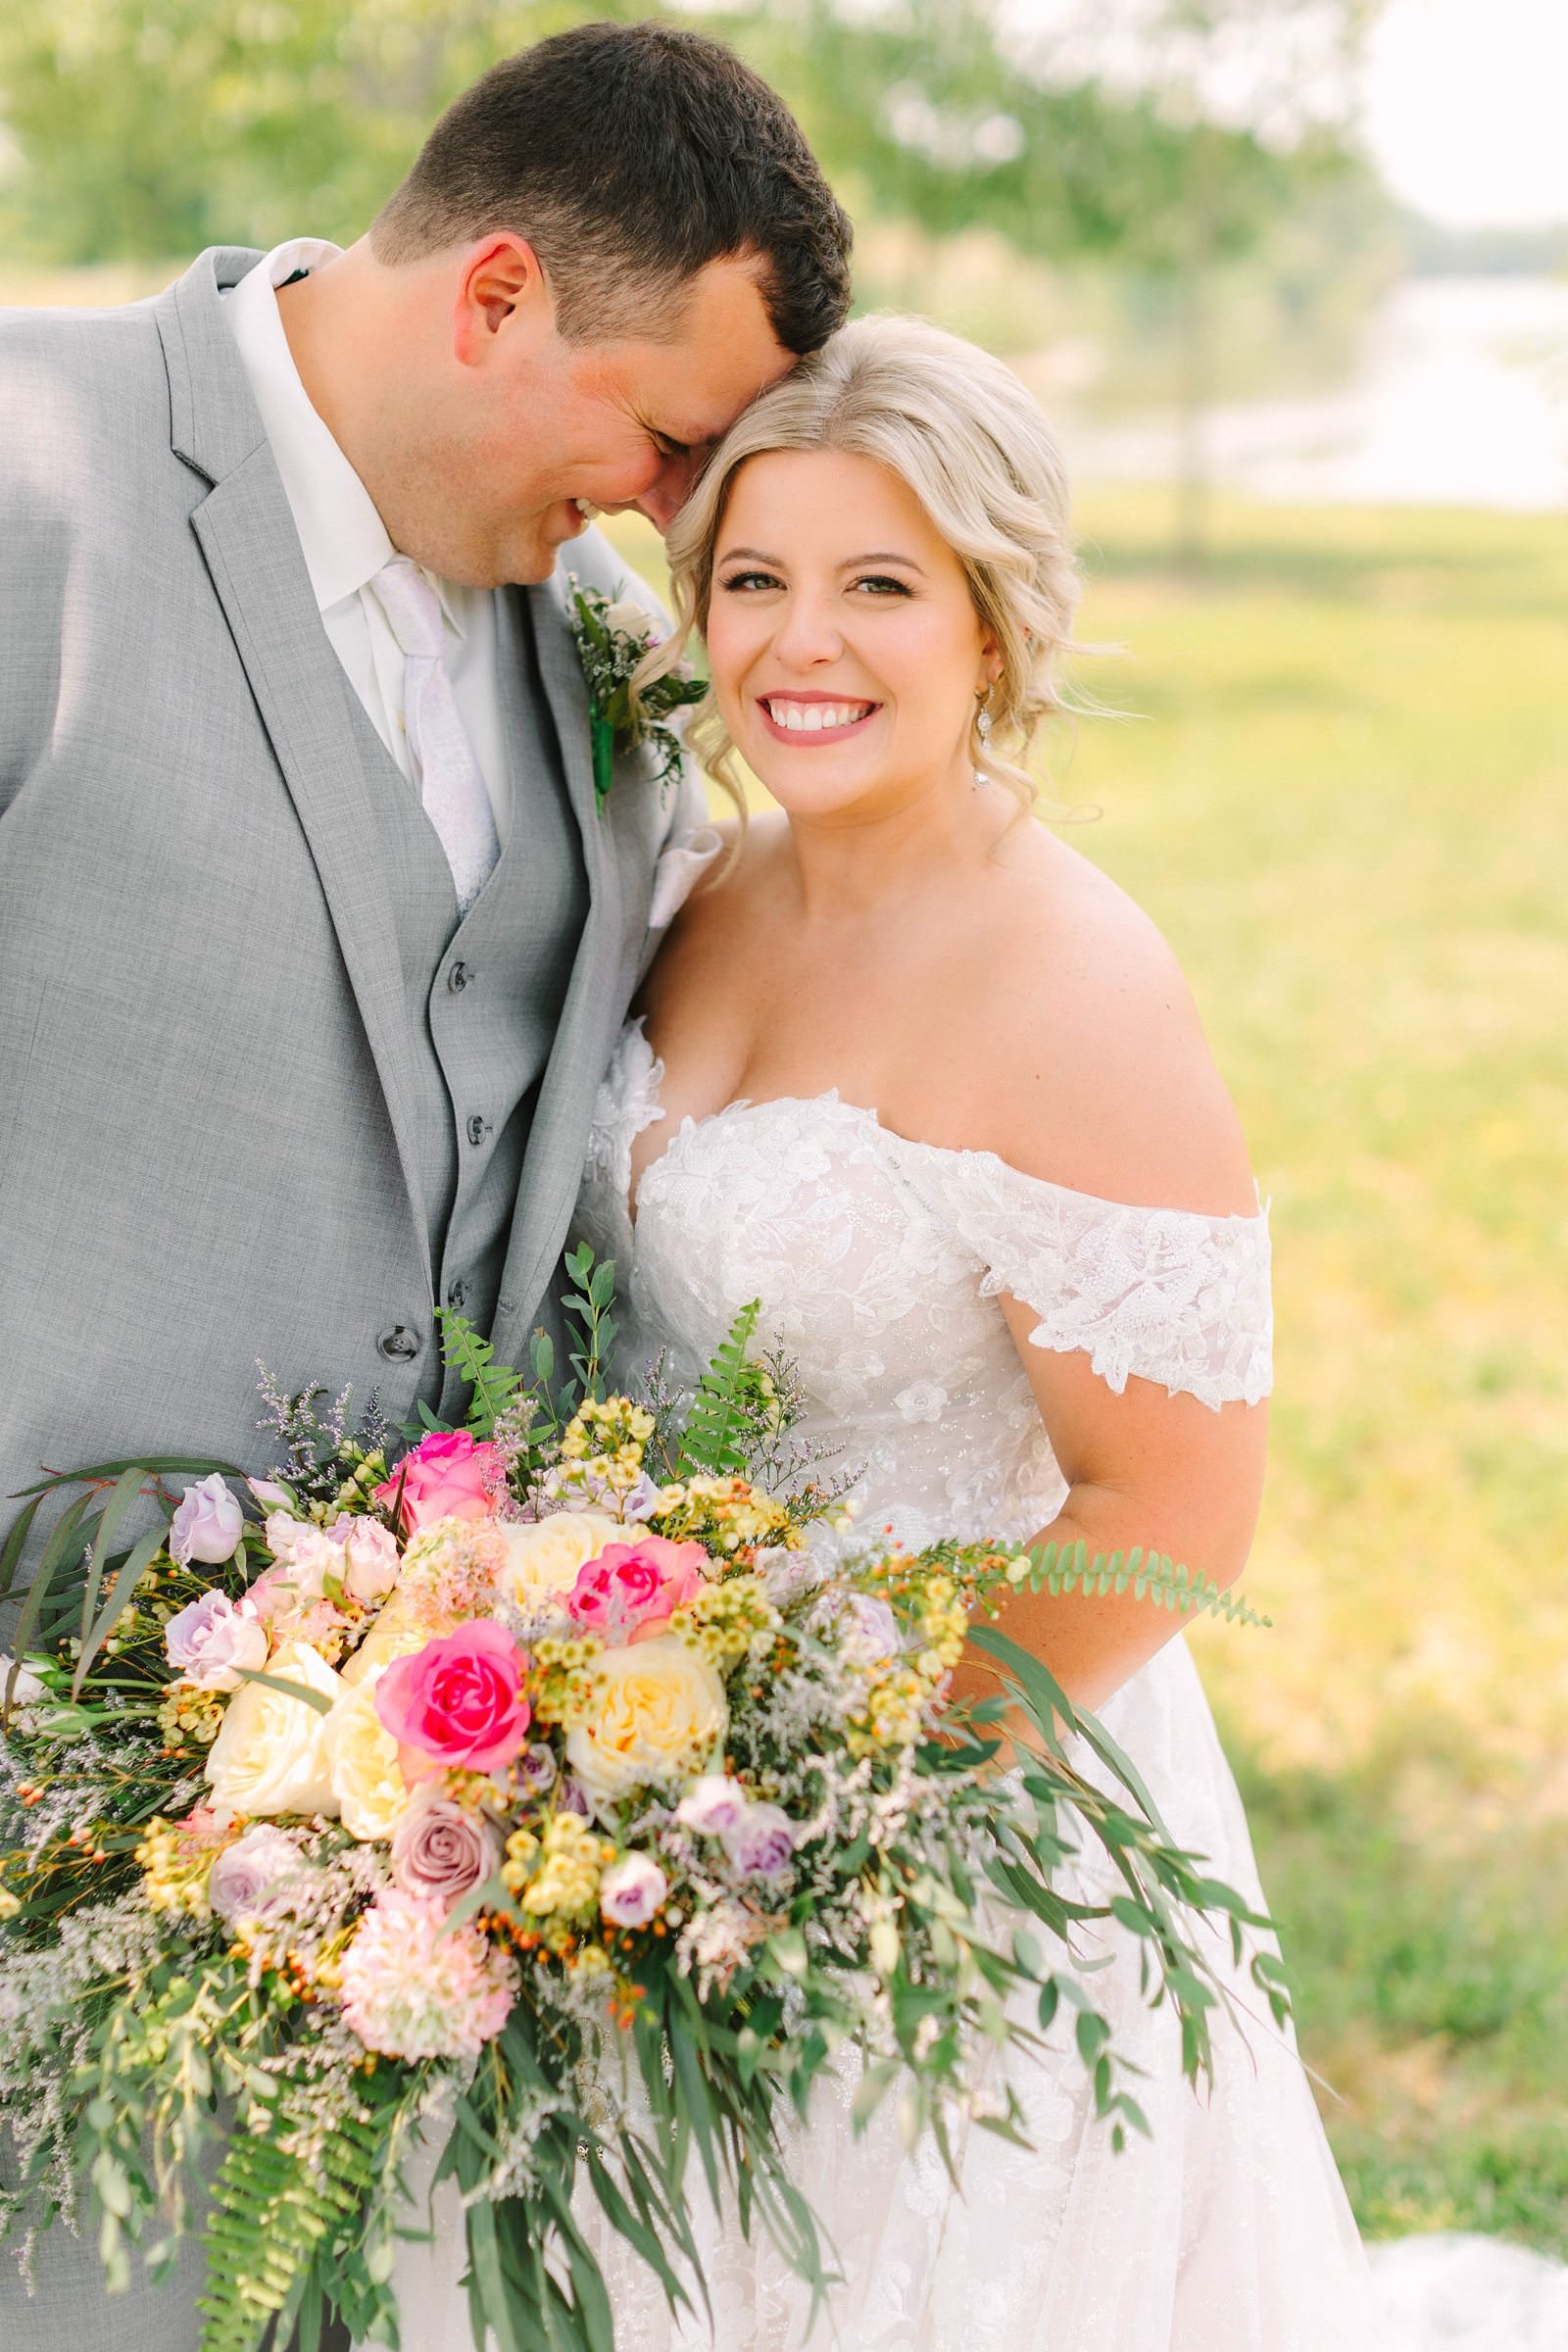 A Sunny Summer Wedding at Friedman Park in Newburgh Indiana | Paige and Dylan | Bret and Brandie Photography074.jpg